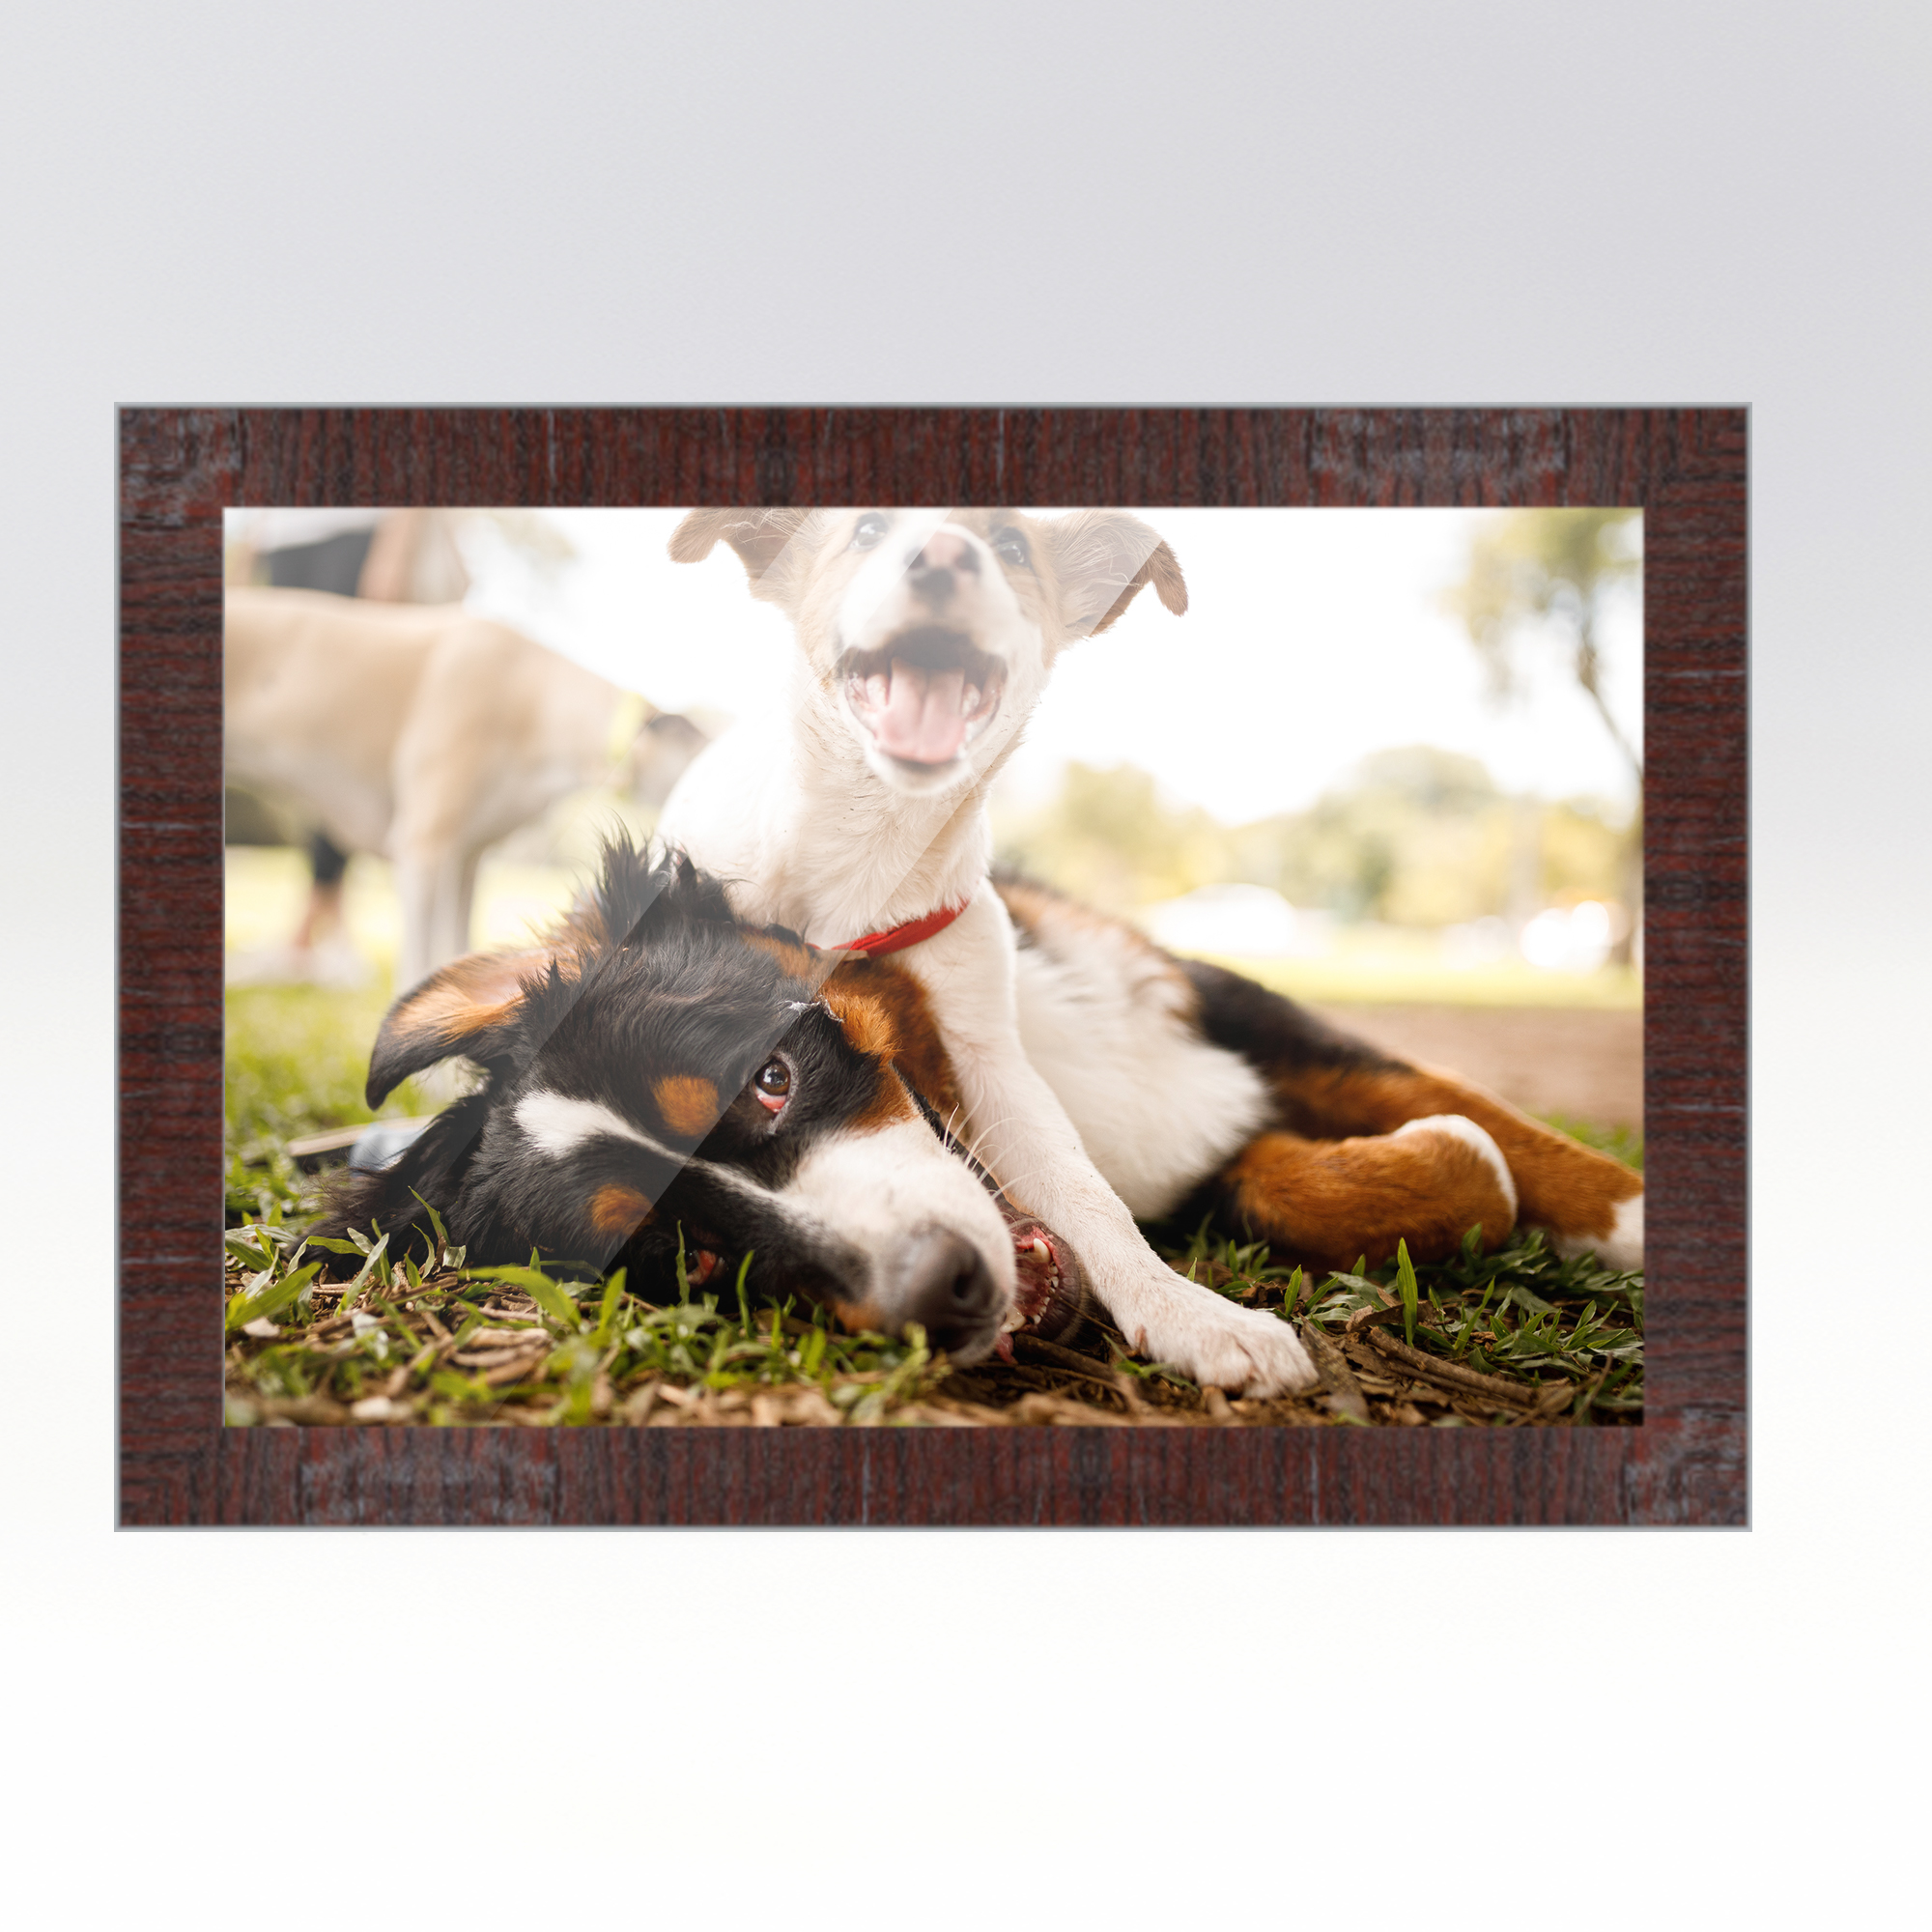 CustomPictureFrames.com 28x40 Brown Picture Frame - Wood Picture Frame Complete with UV Acrylic, Foam Board Backing & Hanging Hardware